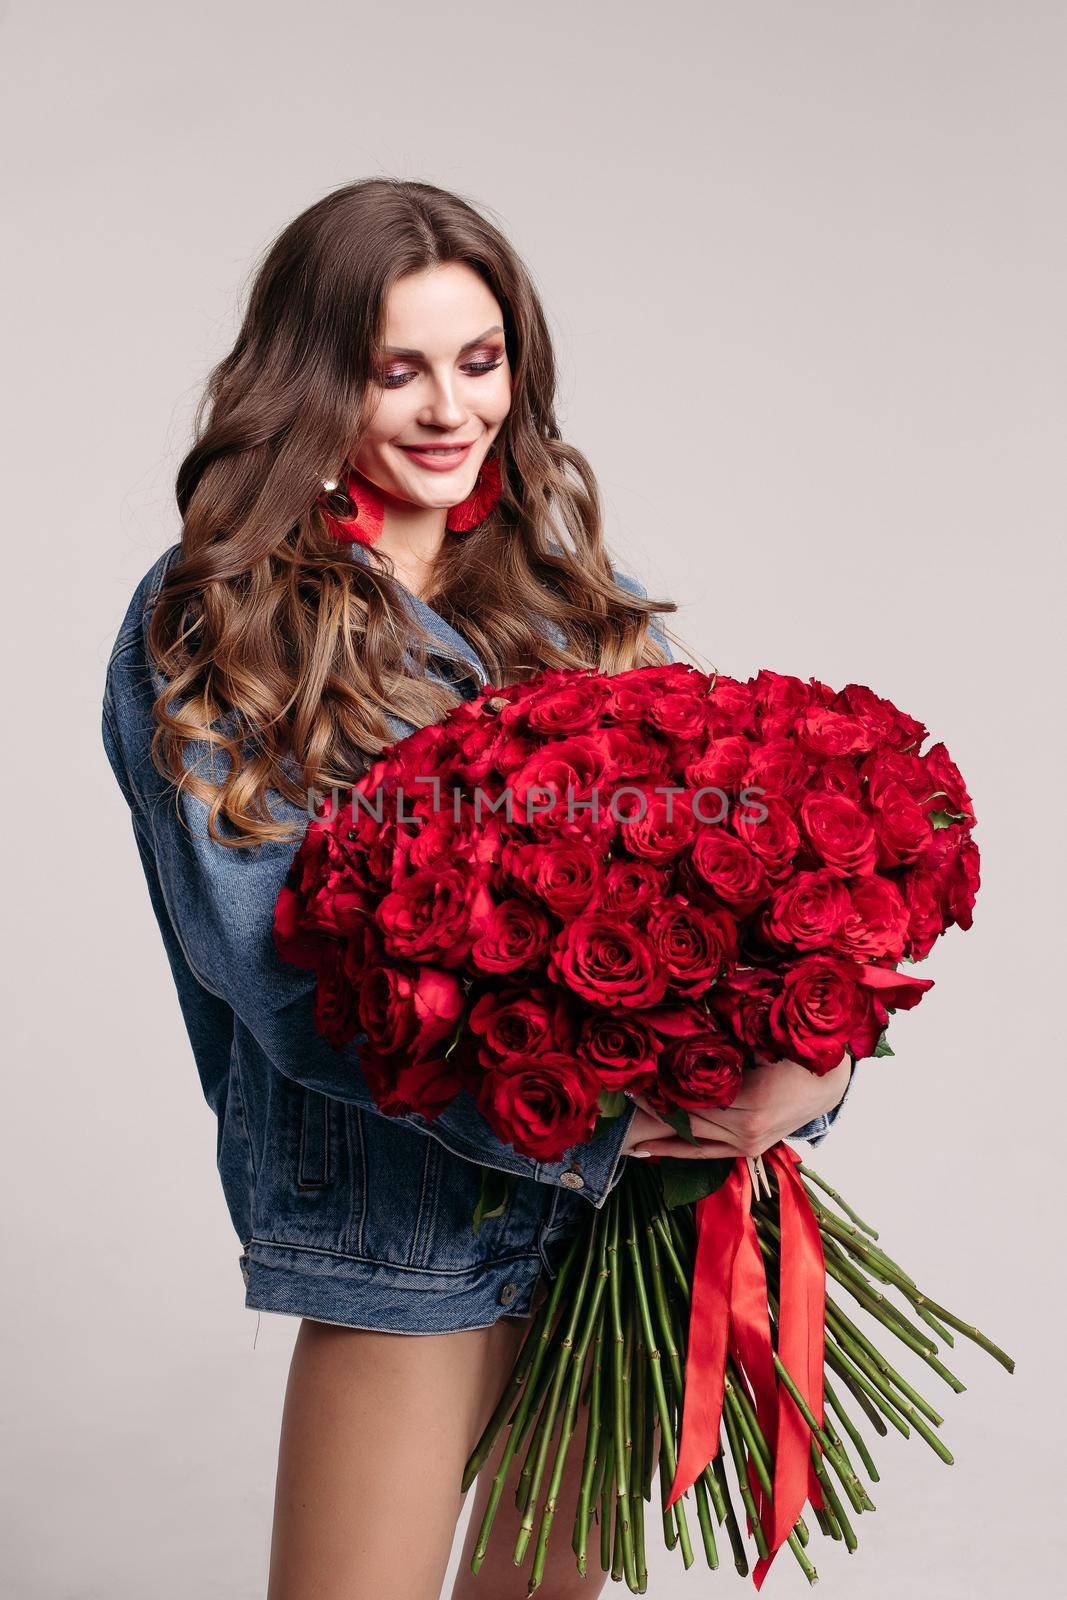 Beautiful brunette girl looking down at huge bouquet of flowers tied with stripes. Elegant lady with long hair standing in jeans jacket. Gorgeous woman with big earings holding roses and smiling.